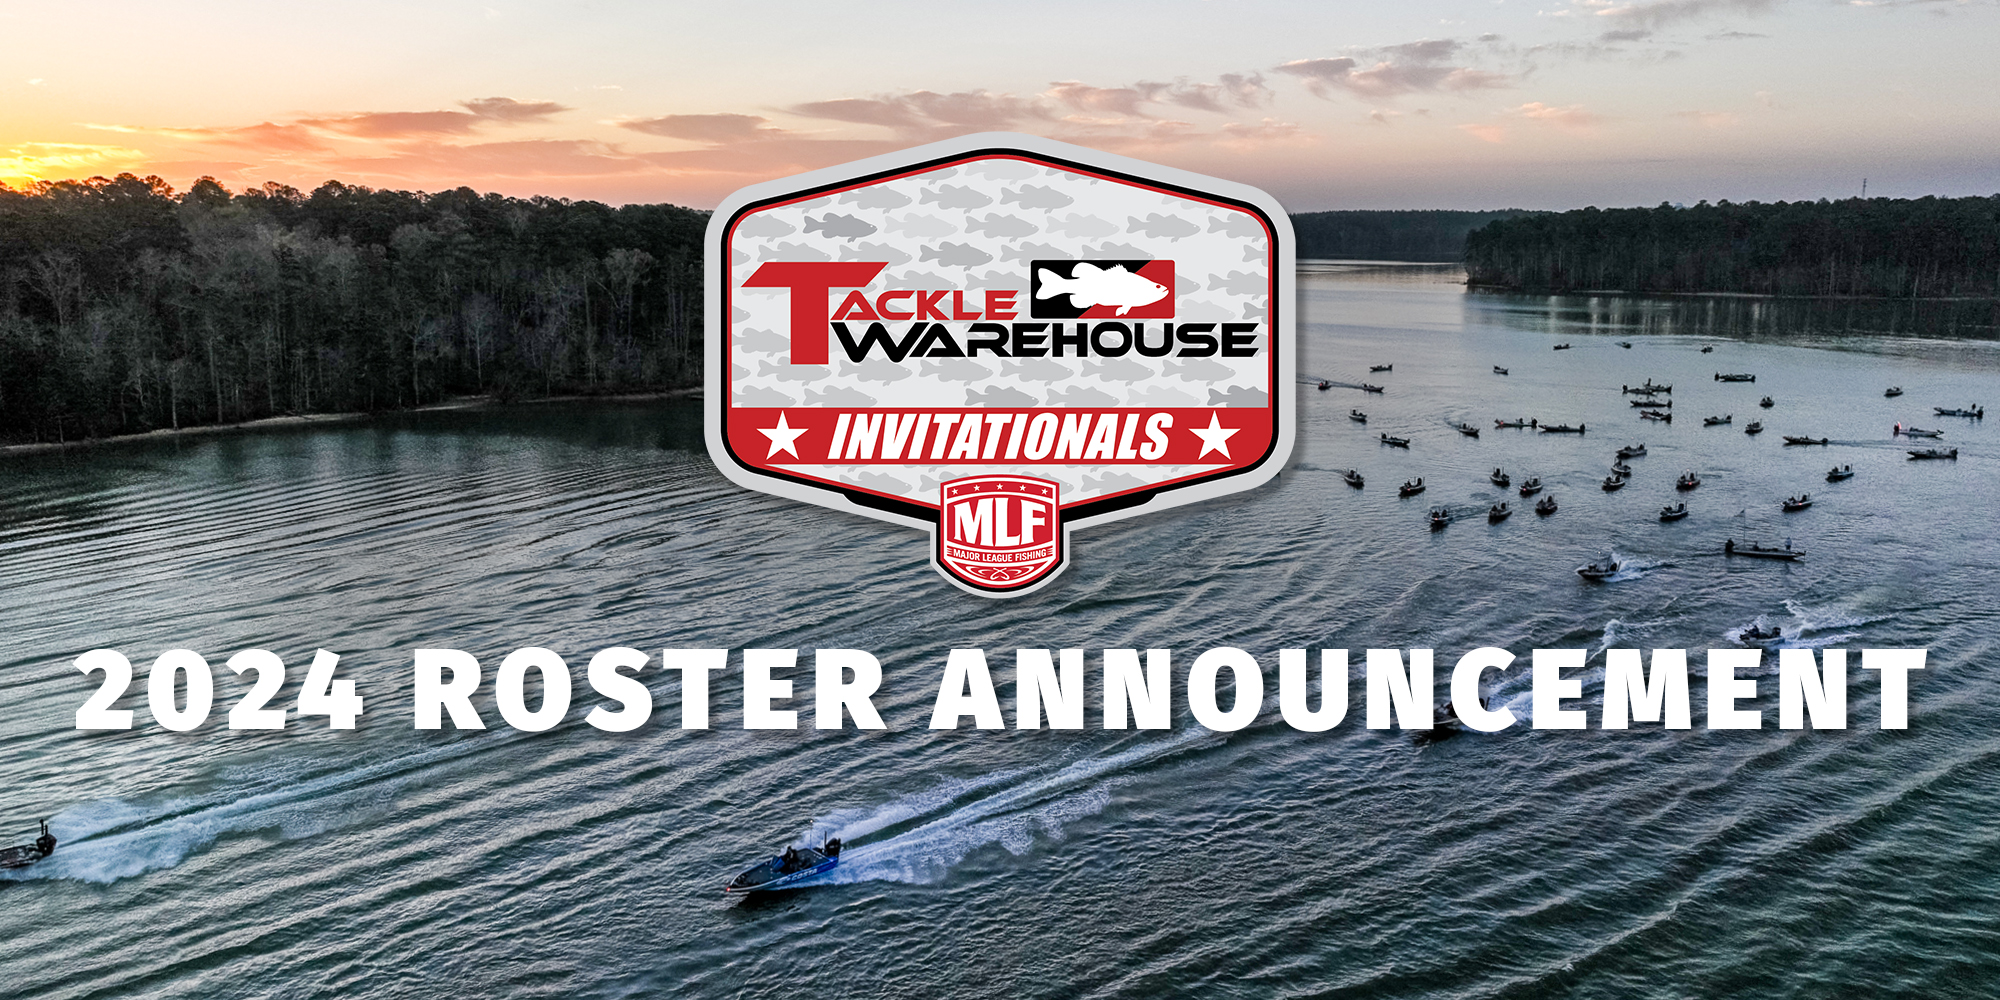 Roster revealed for 2024 Tackle Warehouse Invitationals - Major